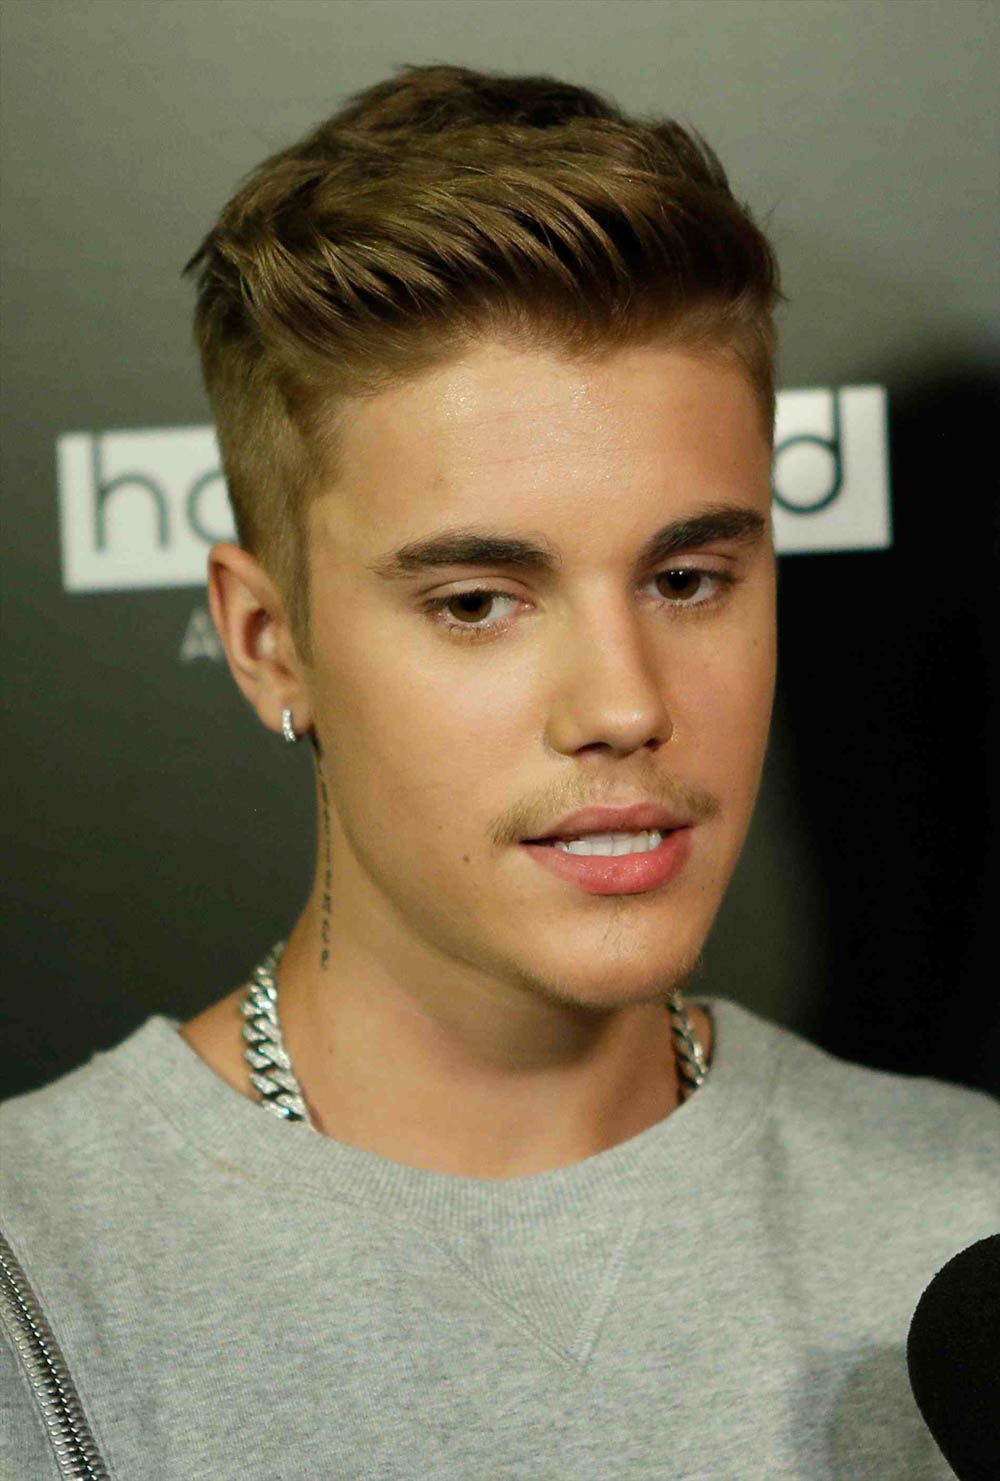 Is Justin Bieber Going Back to His Floppy Teen Hairstyle?